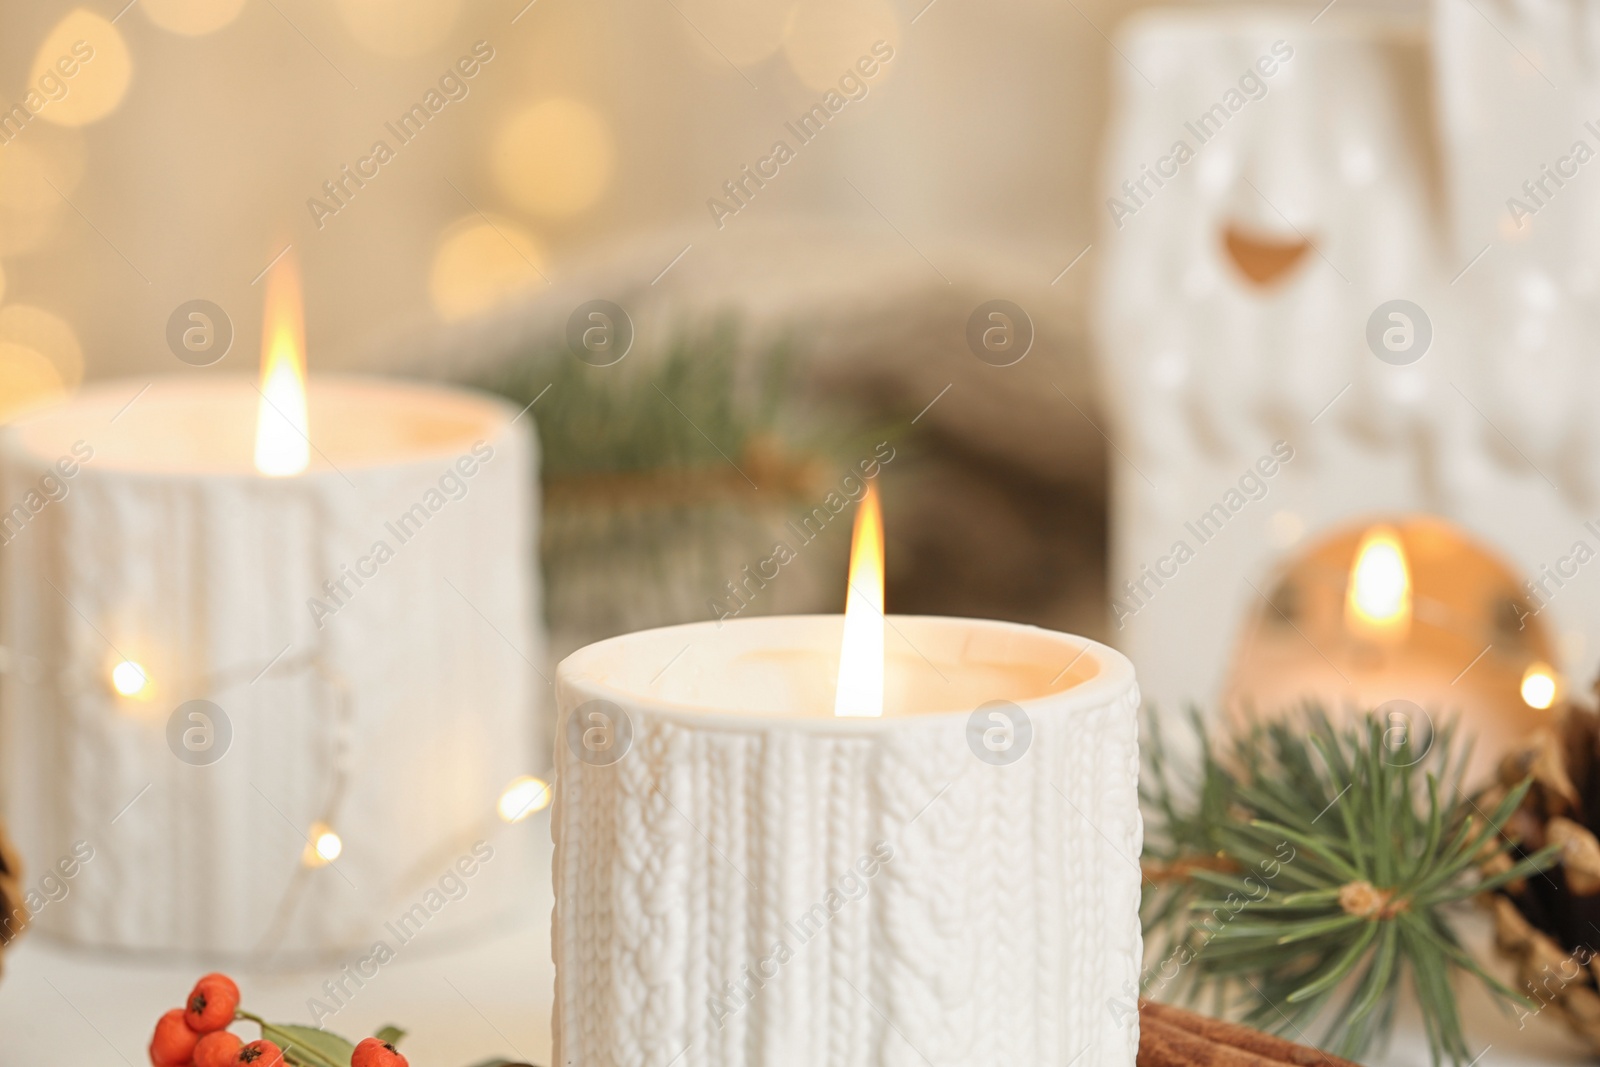 Photo of Holders with burning candles and decoration against blurred Christmas lights, closeup